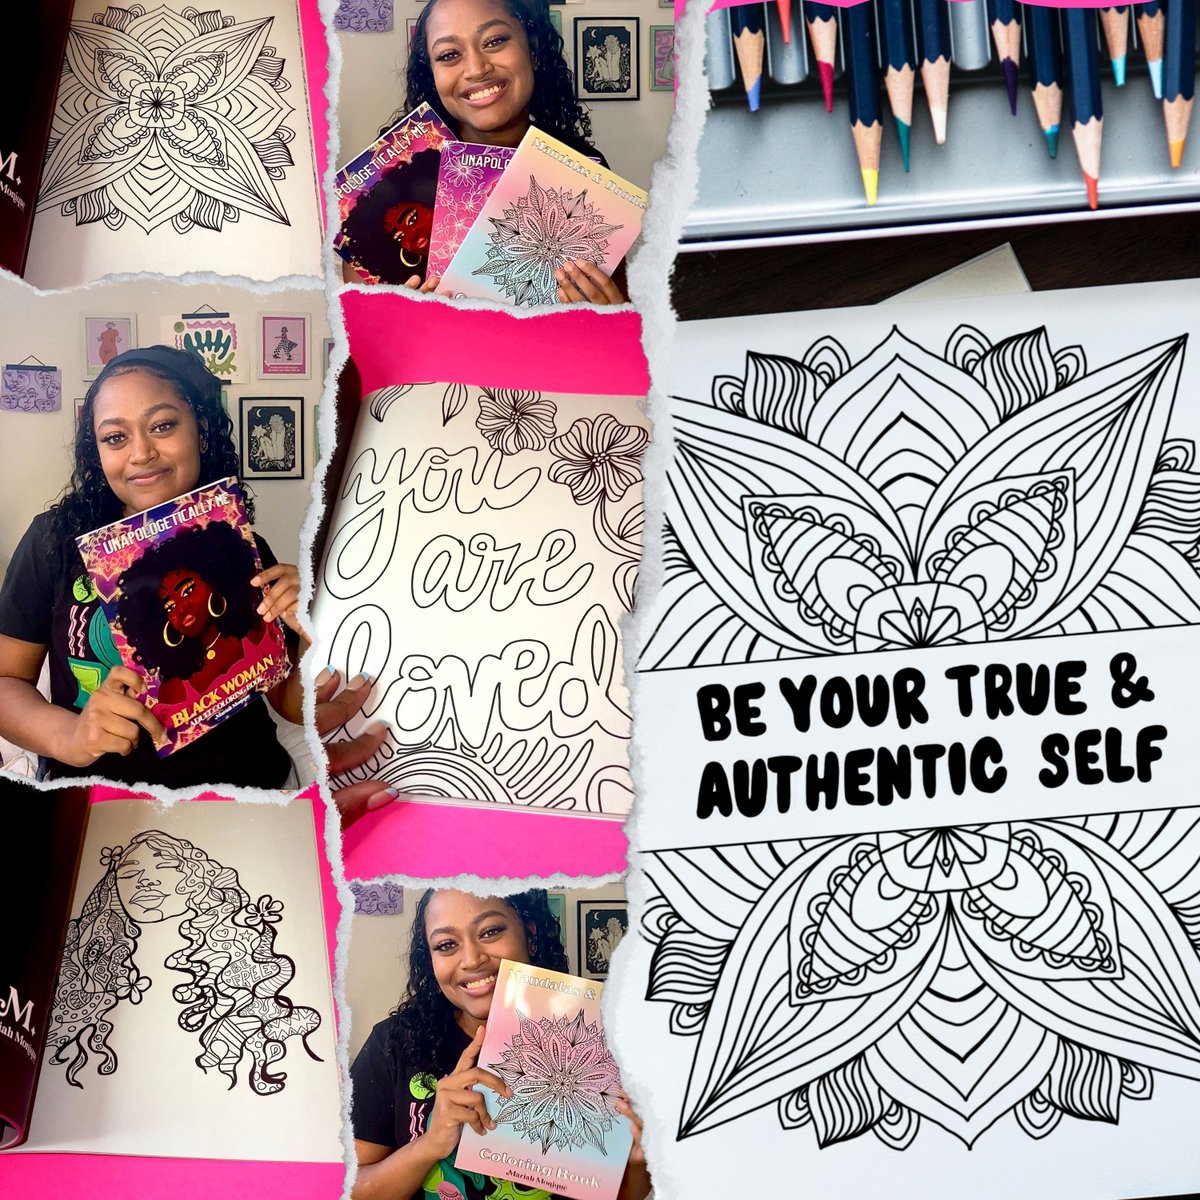 Digital Coloring Pages are now available on my site! Shop them all on MariahMoniqueDesign.com .
.
.
Physical coloring books are coming to my site soon, I’ll keep you all updated! For now, you can buy full coloring books on Amazon at the link in my bio 💓
.
.
.
.
.
#colorwithme#co